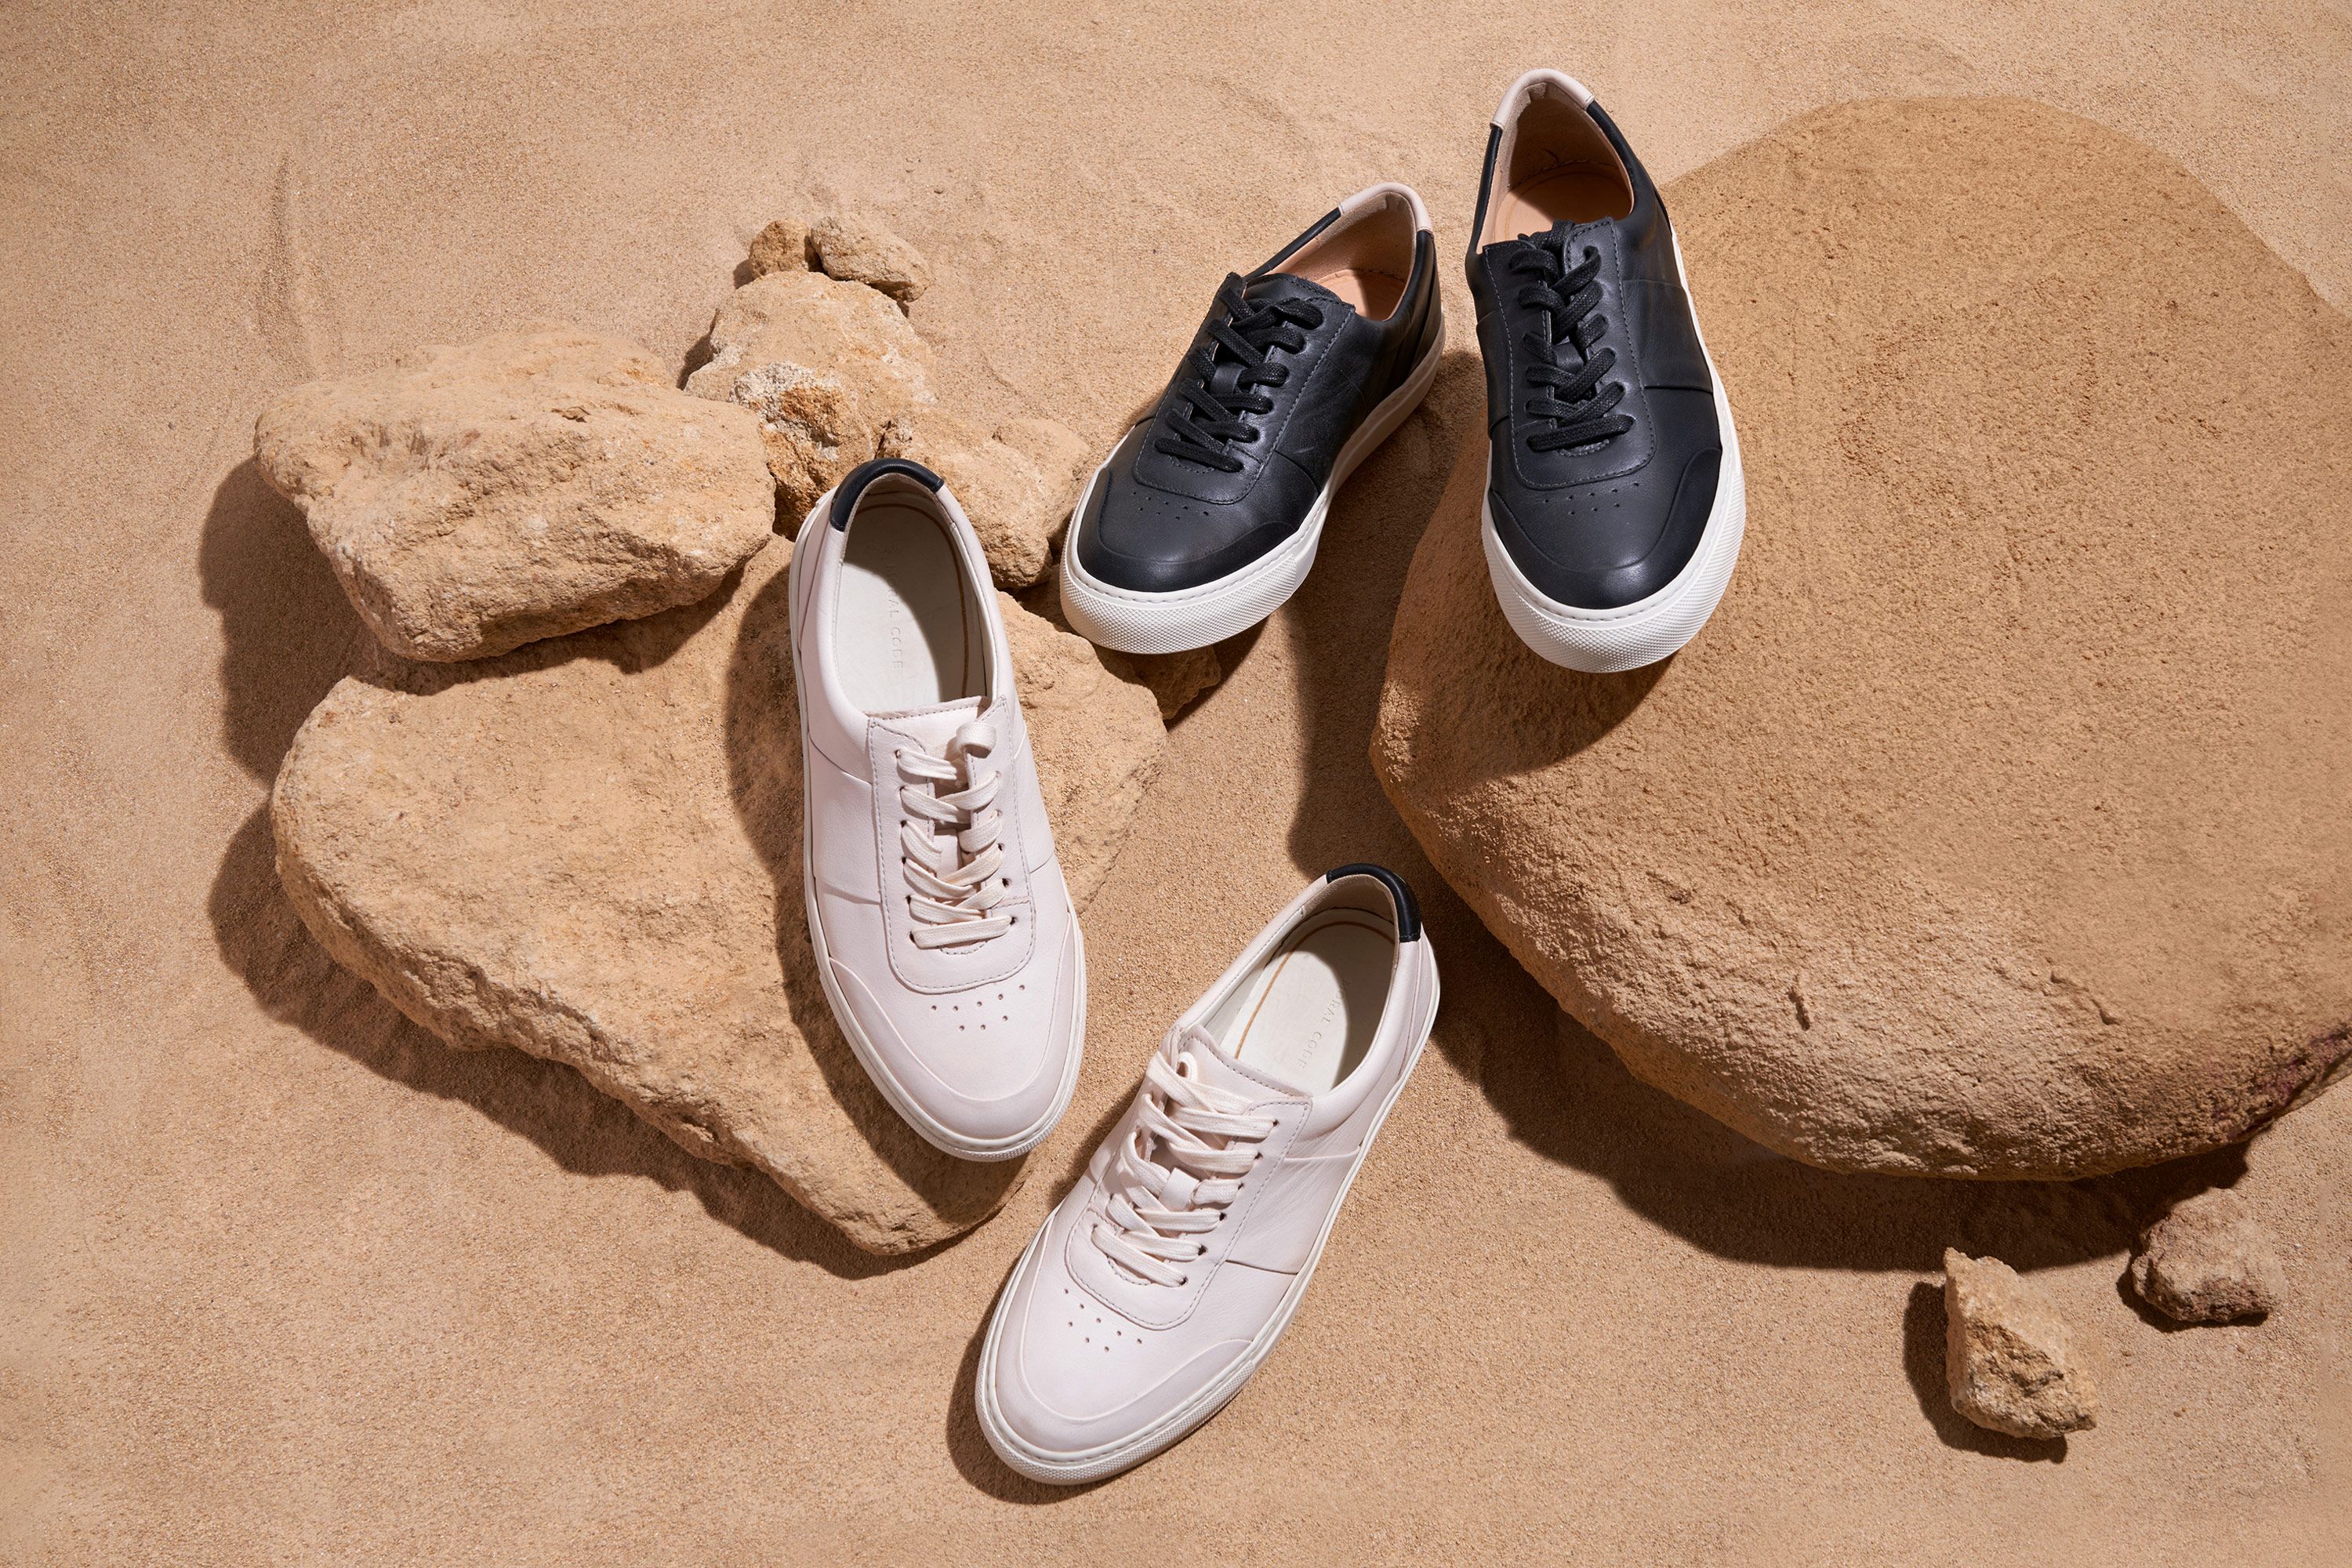 These Low Top Leather Sneakers Are Perfect for Spring